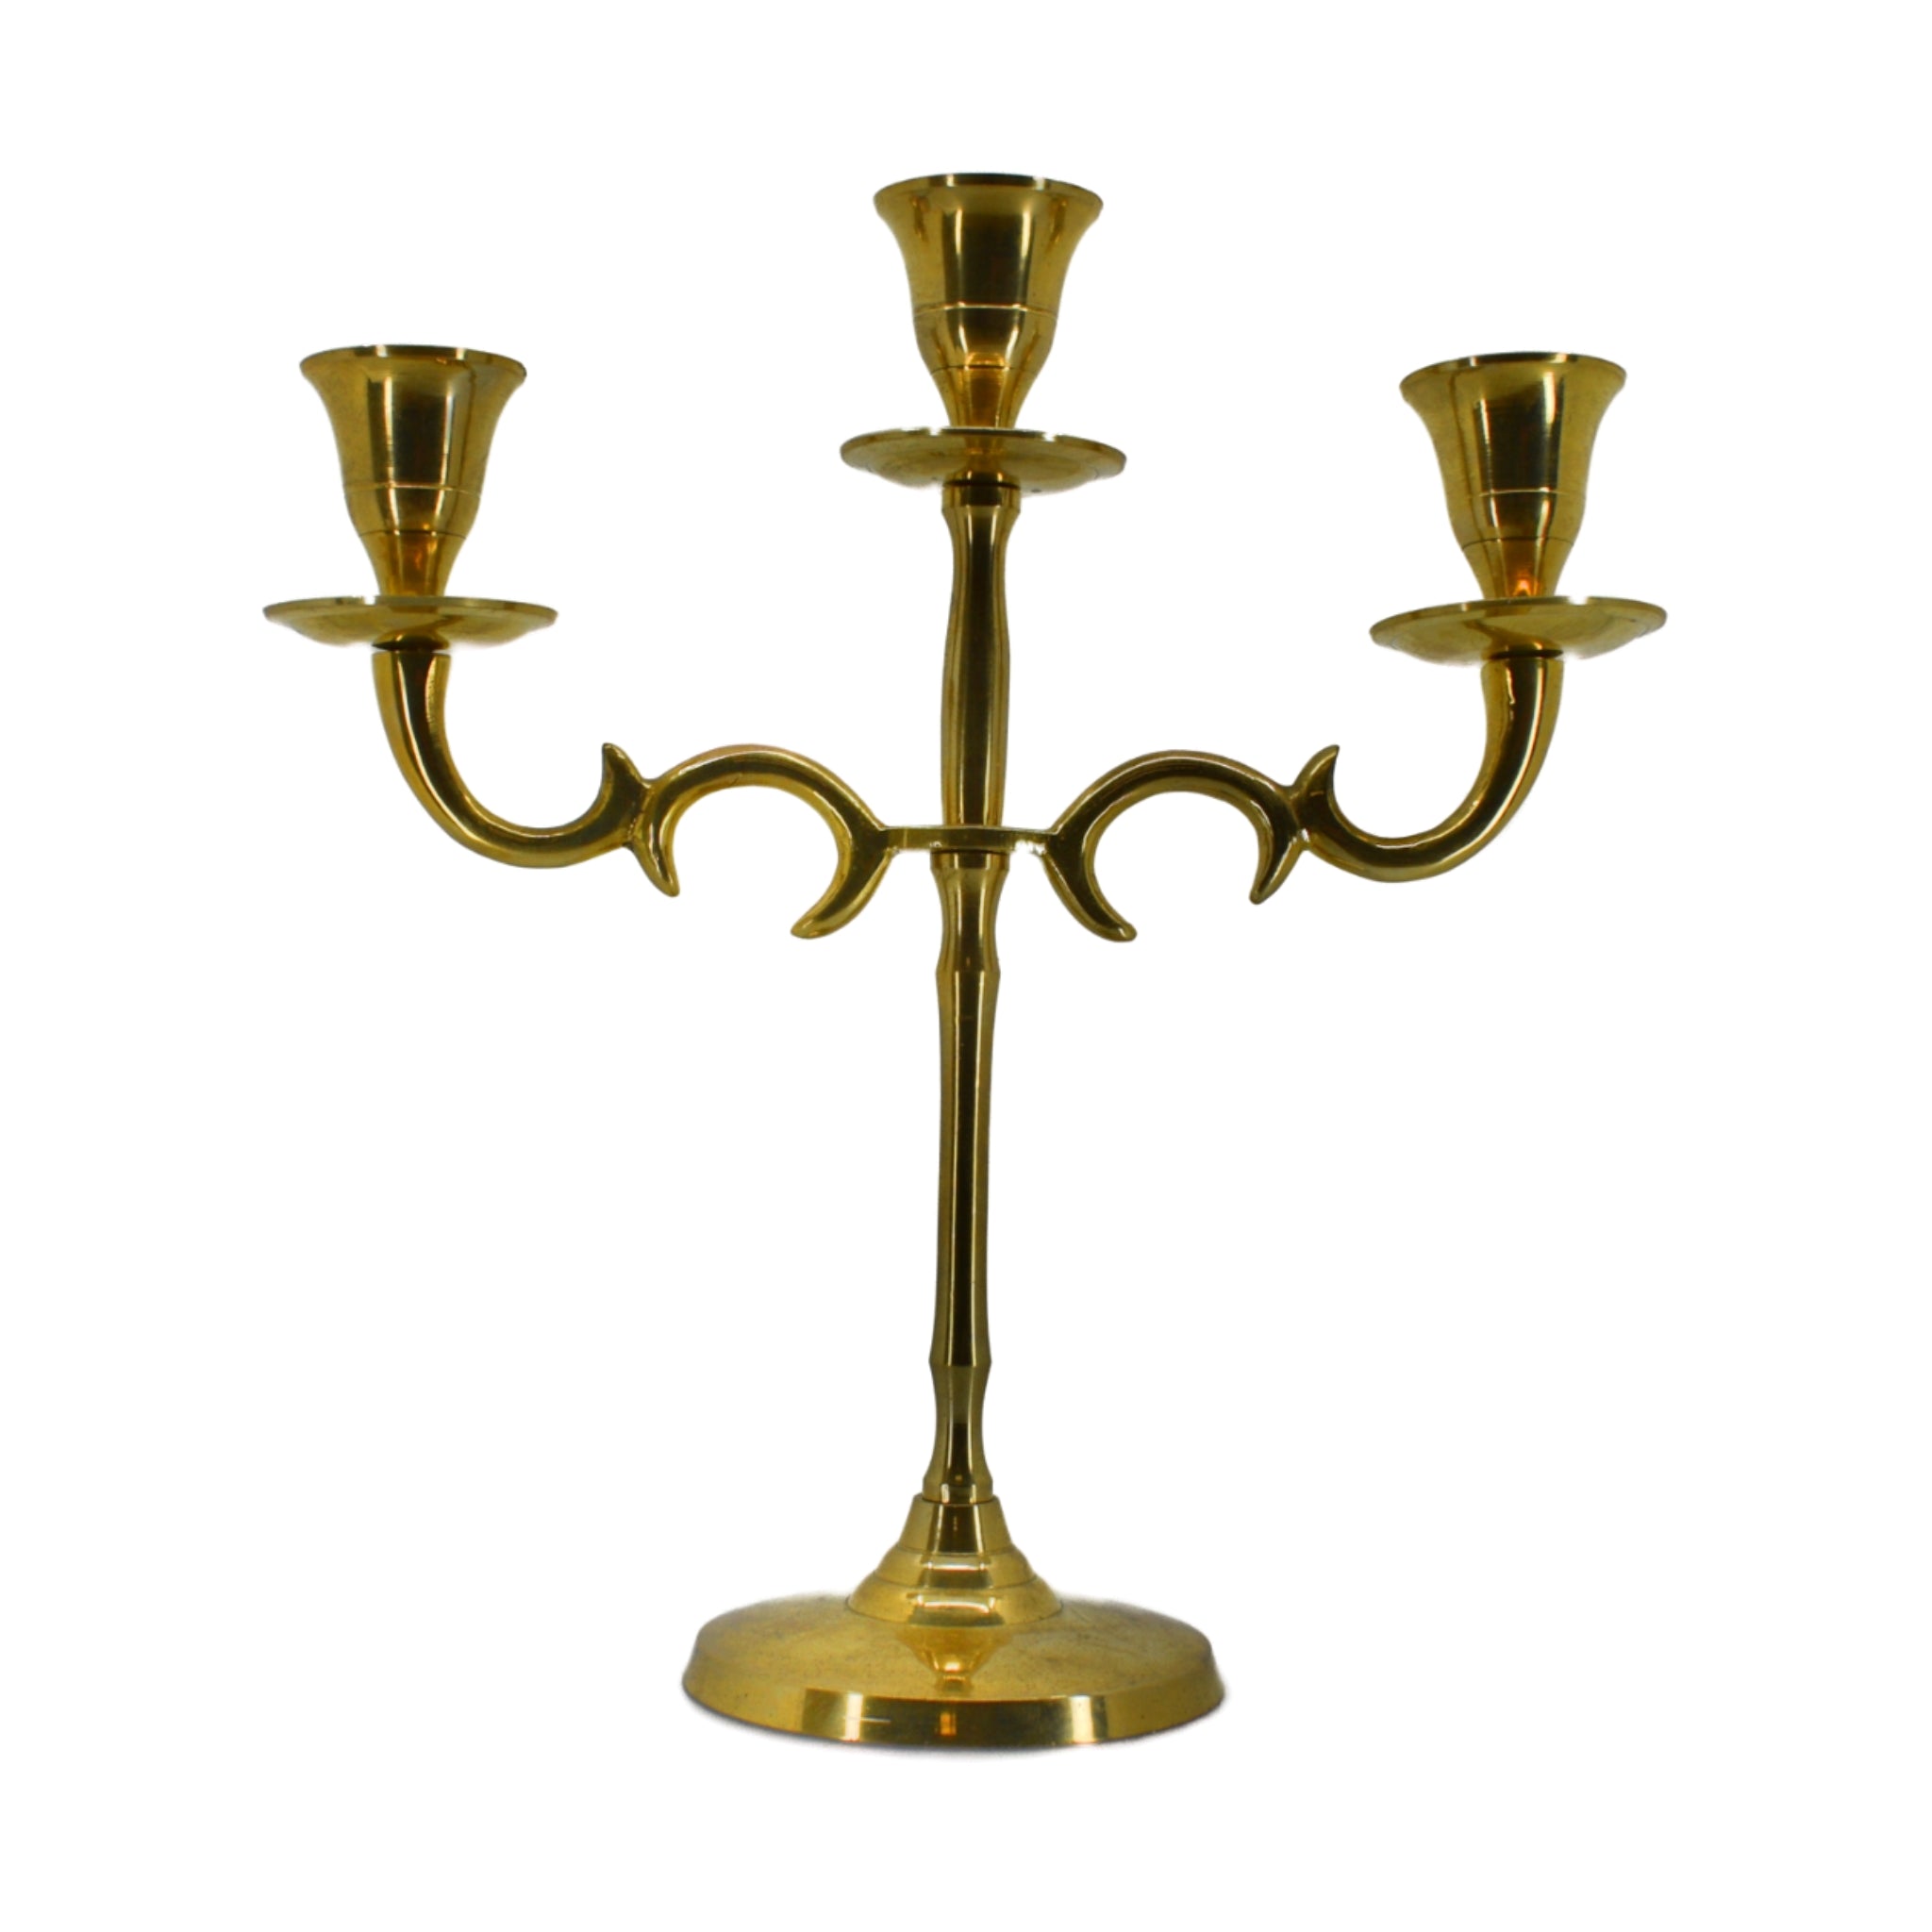 3 tiered candle holder for tapers. brass color 